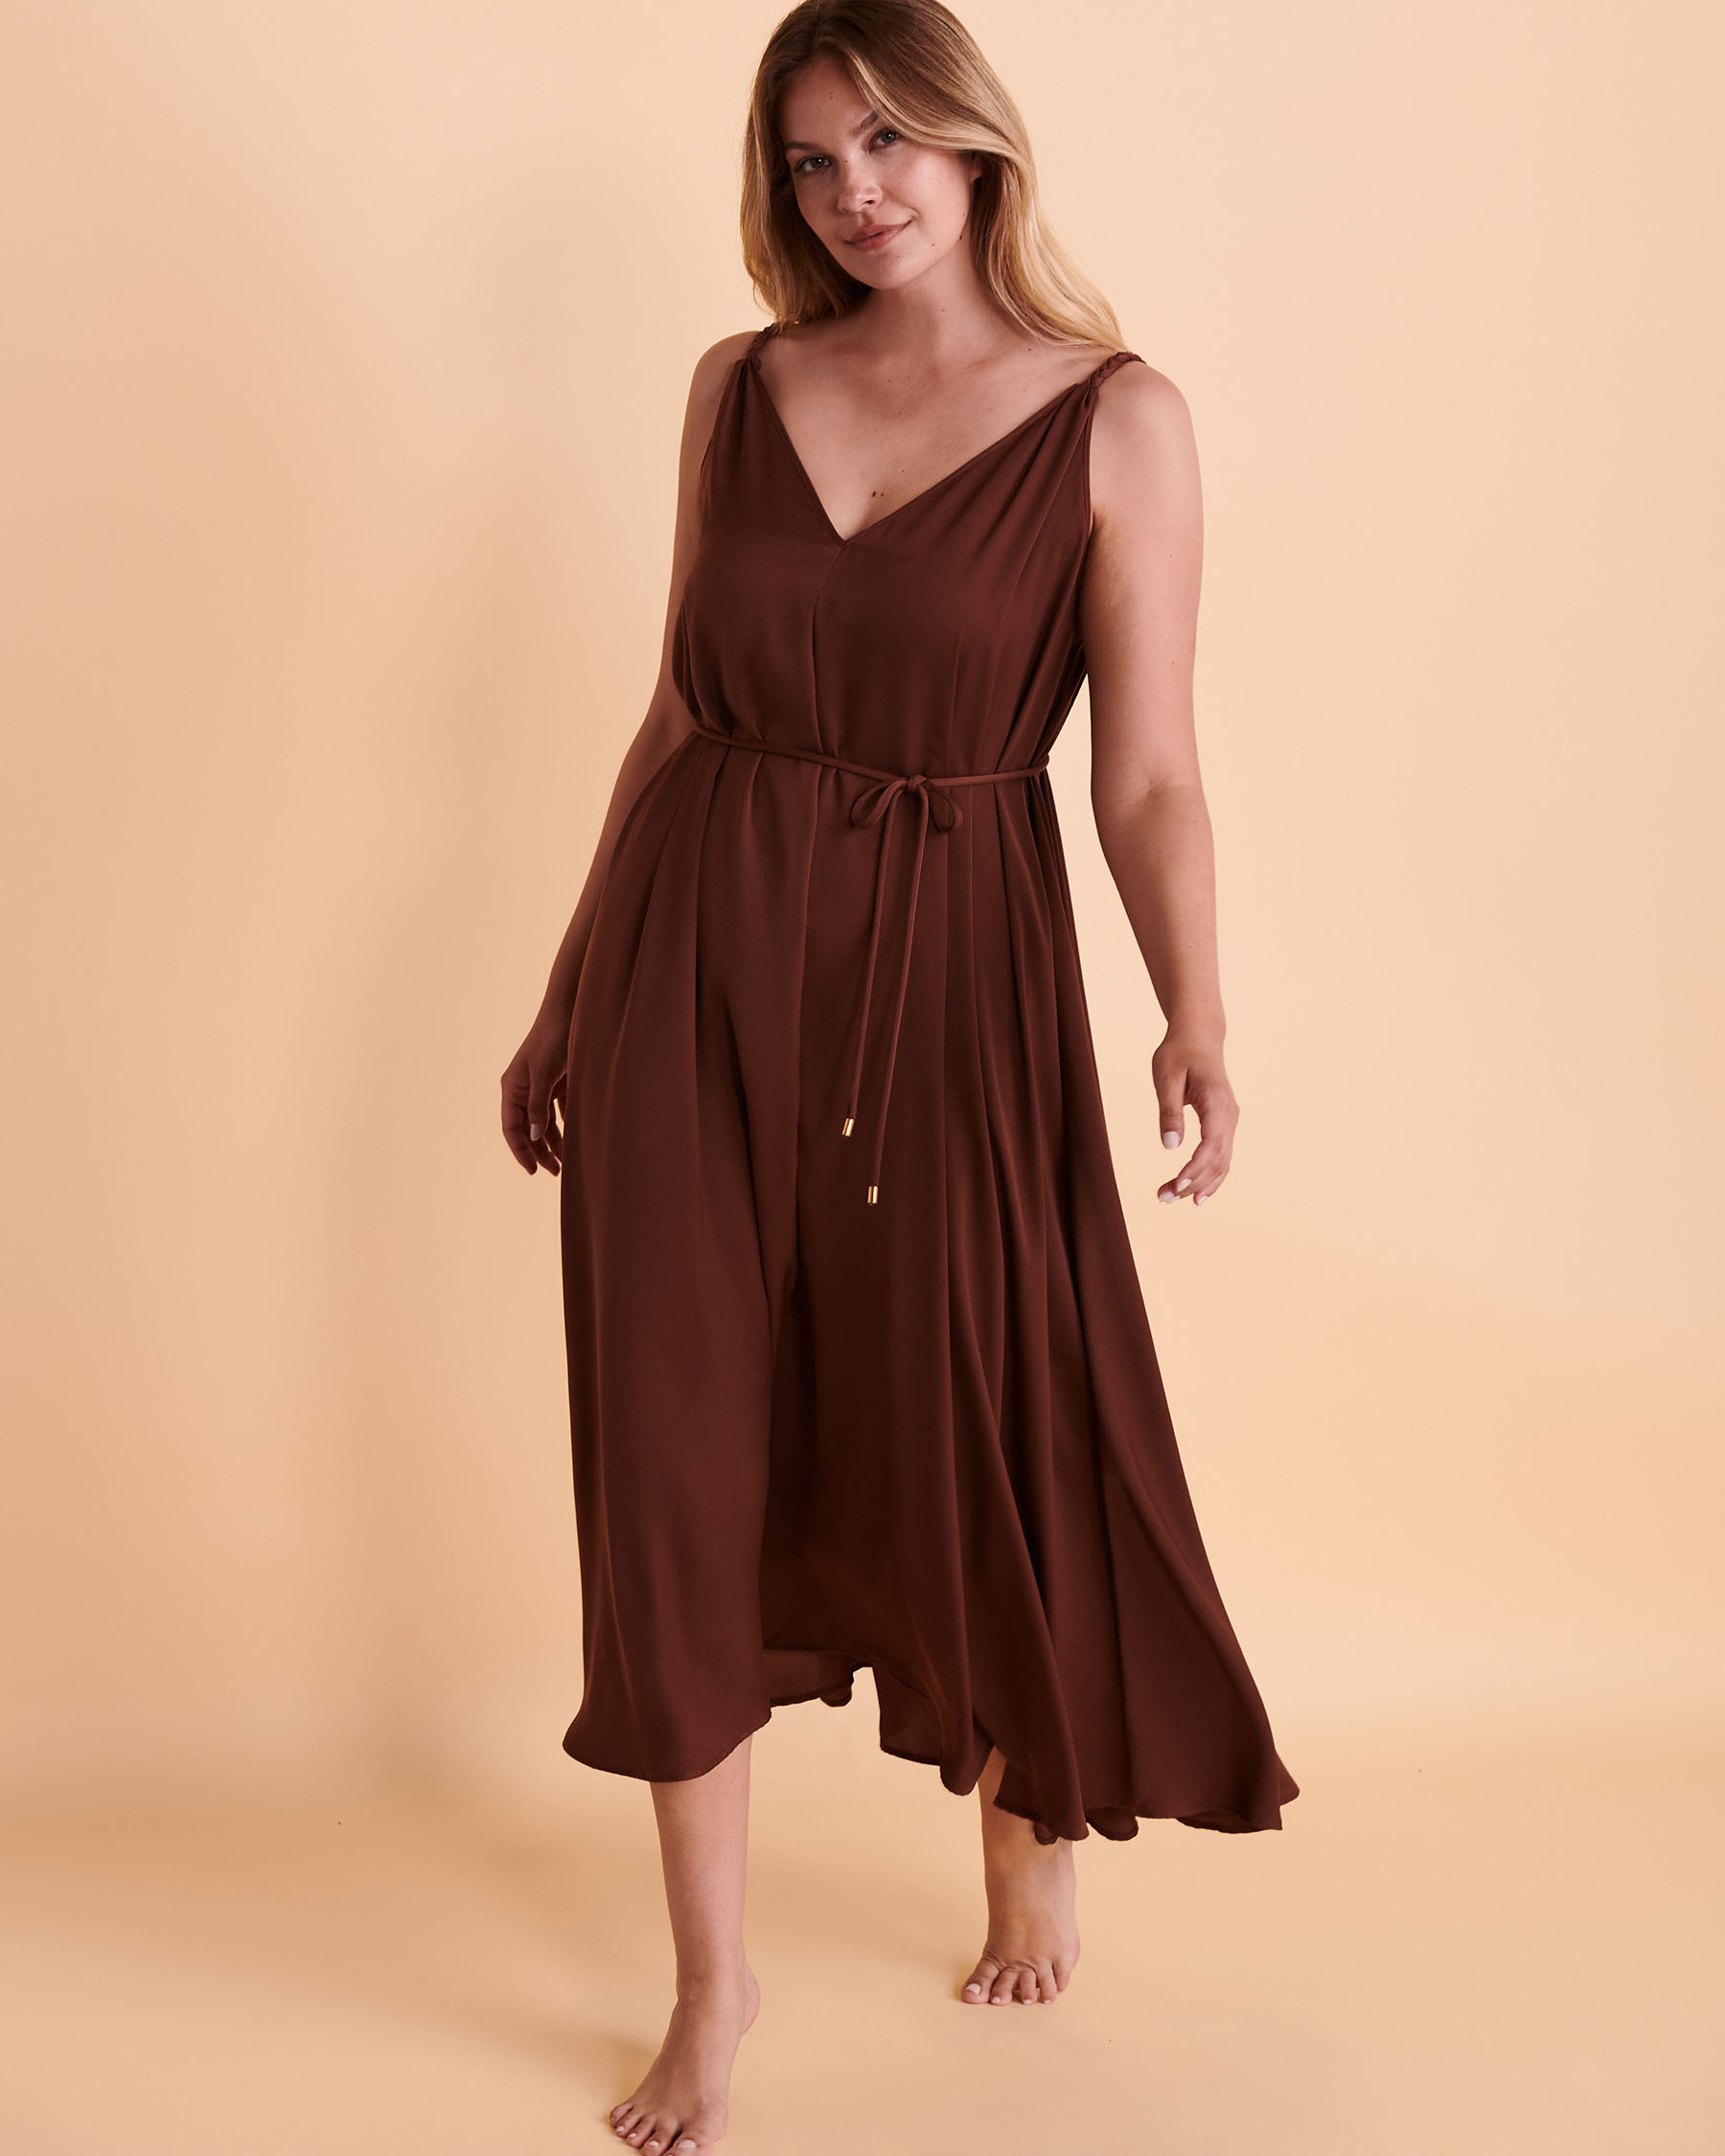 SANTEMARE Open Back Maxi Dress Brown 02300065 - View3